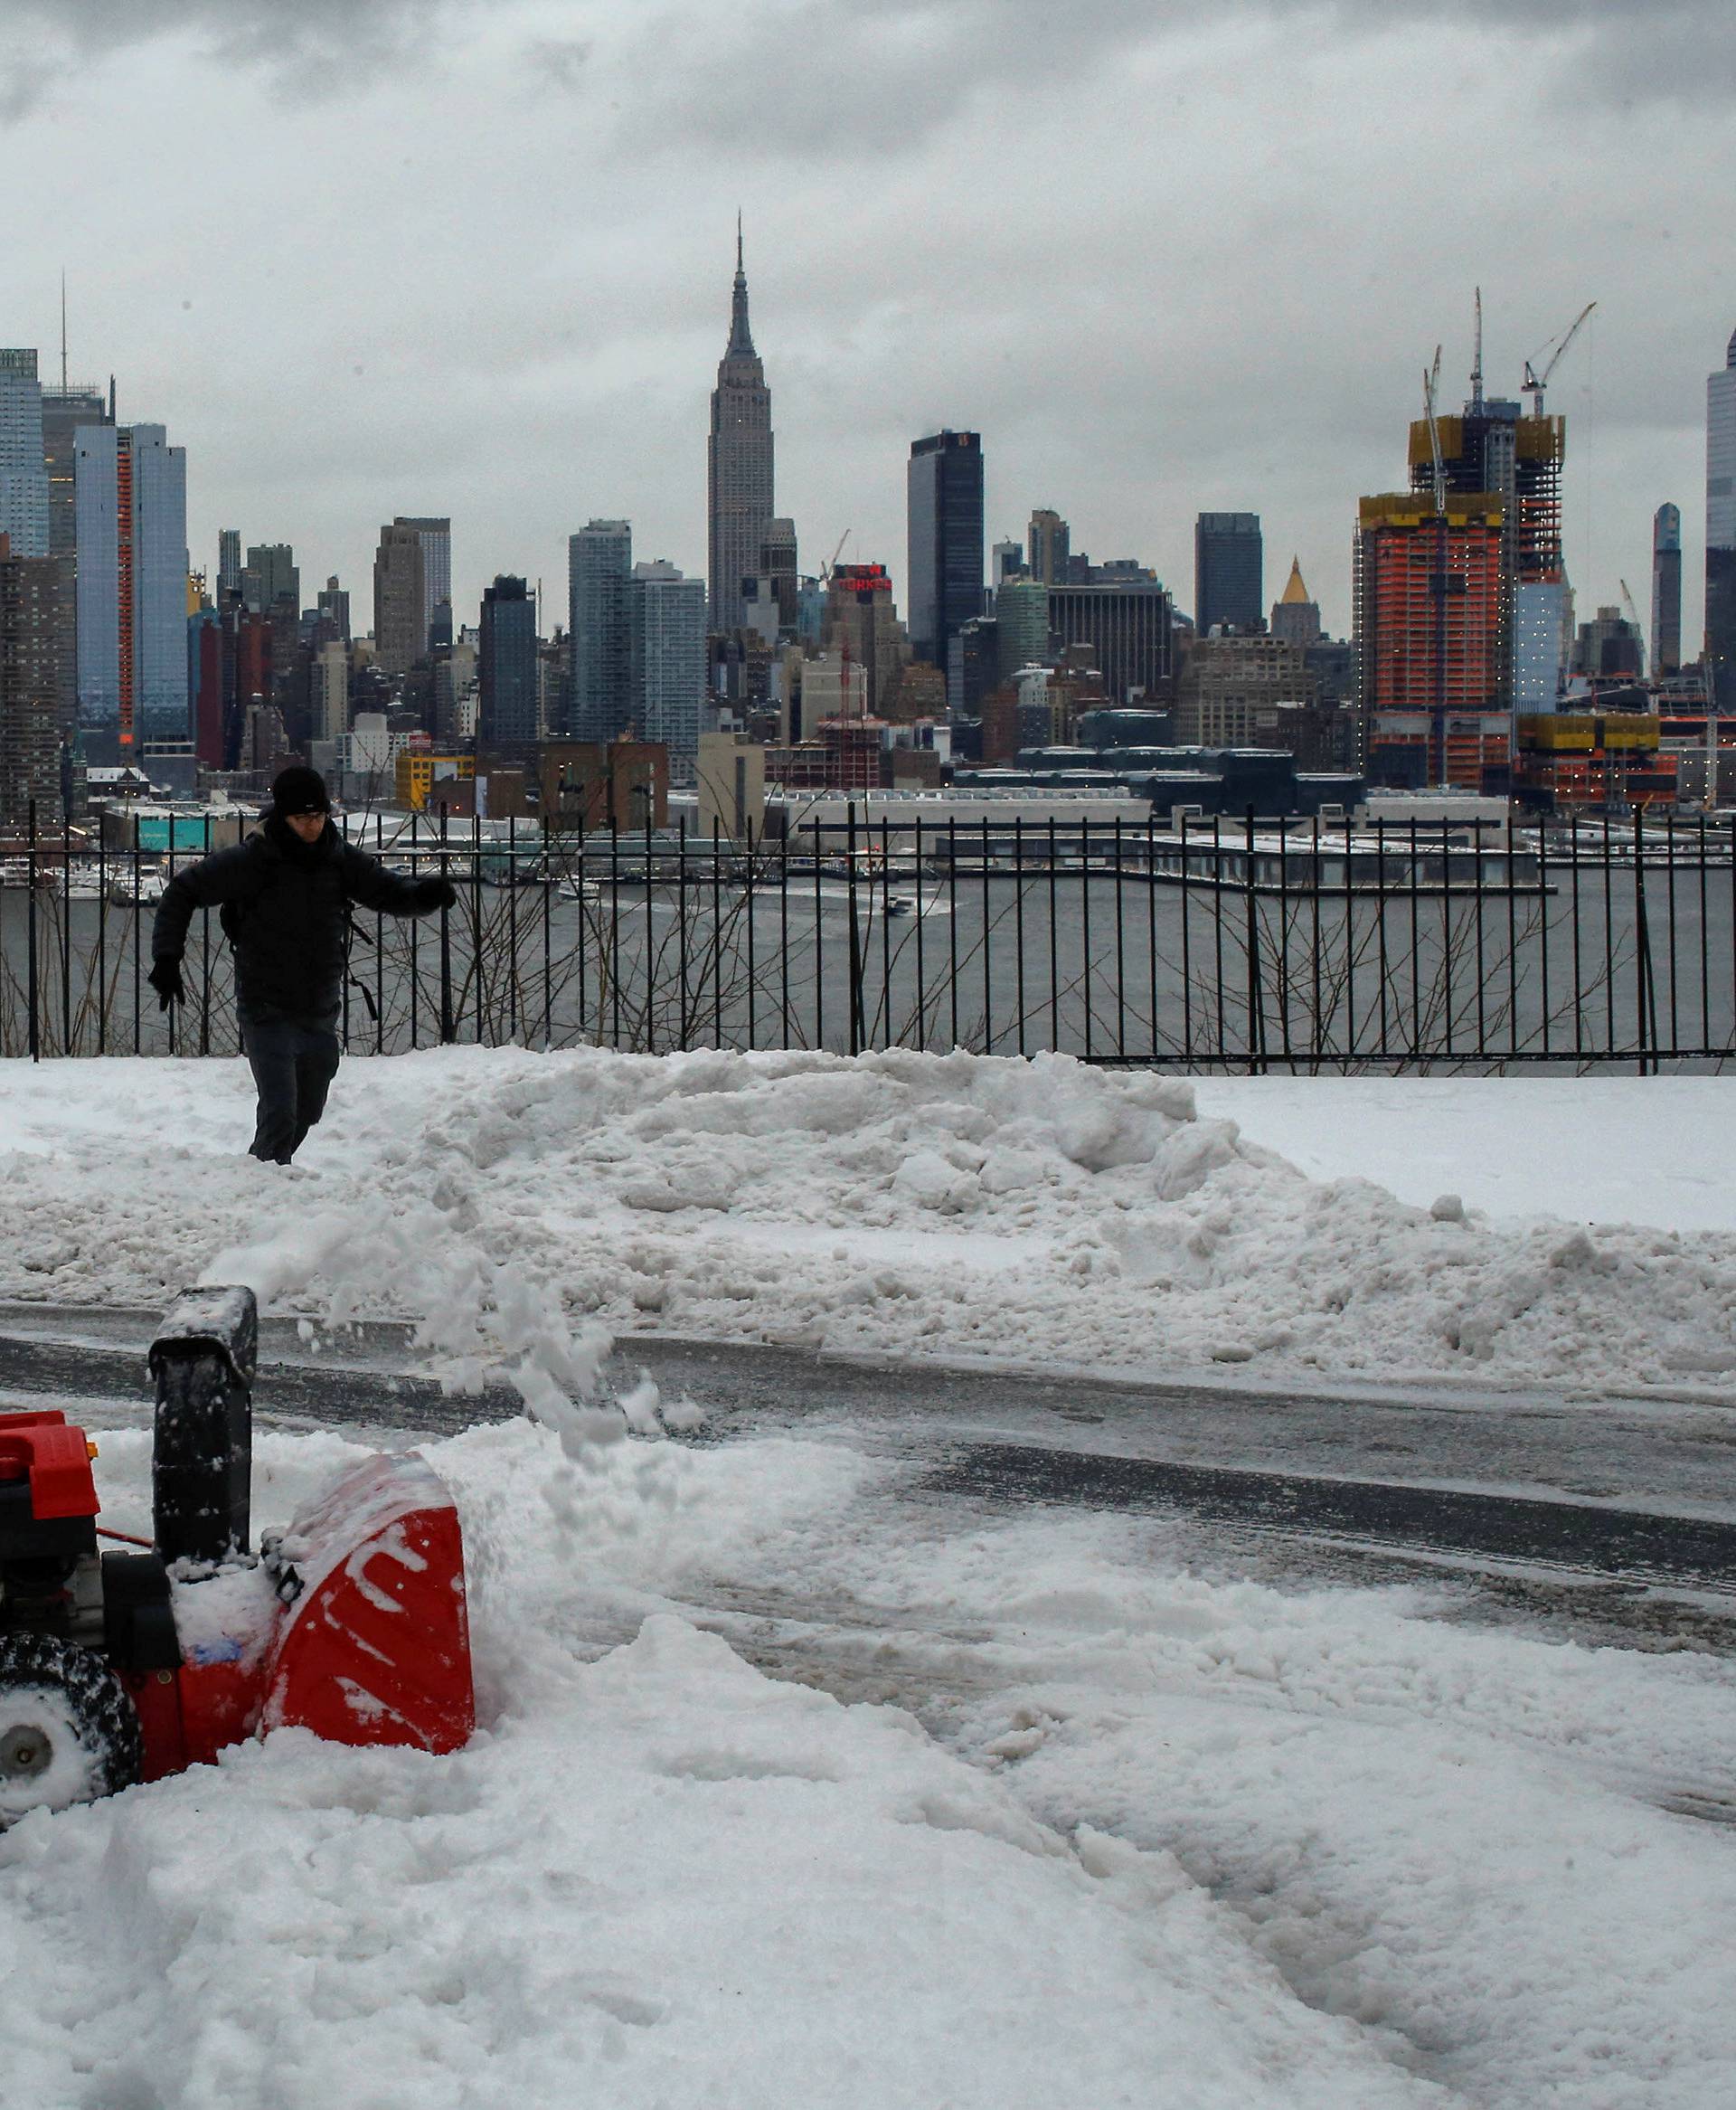 A resident clears the street of snow in Weehawken, New Jersey, as the Empire State Building and Middle Manhattan are seen after a snowstorm in New York